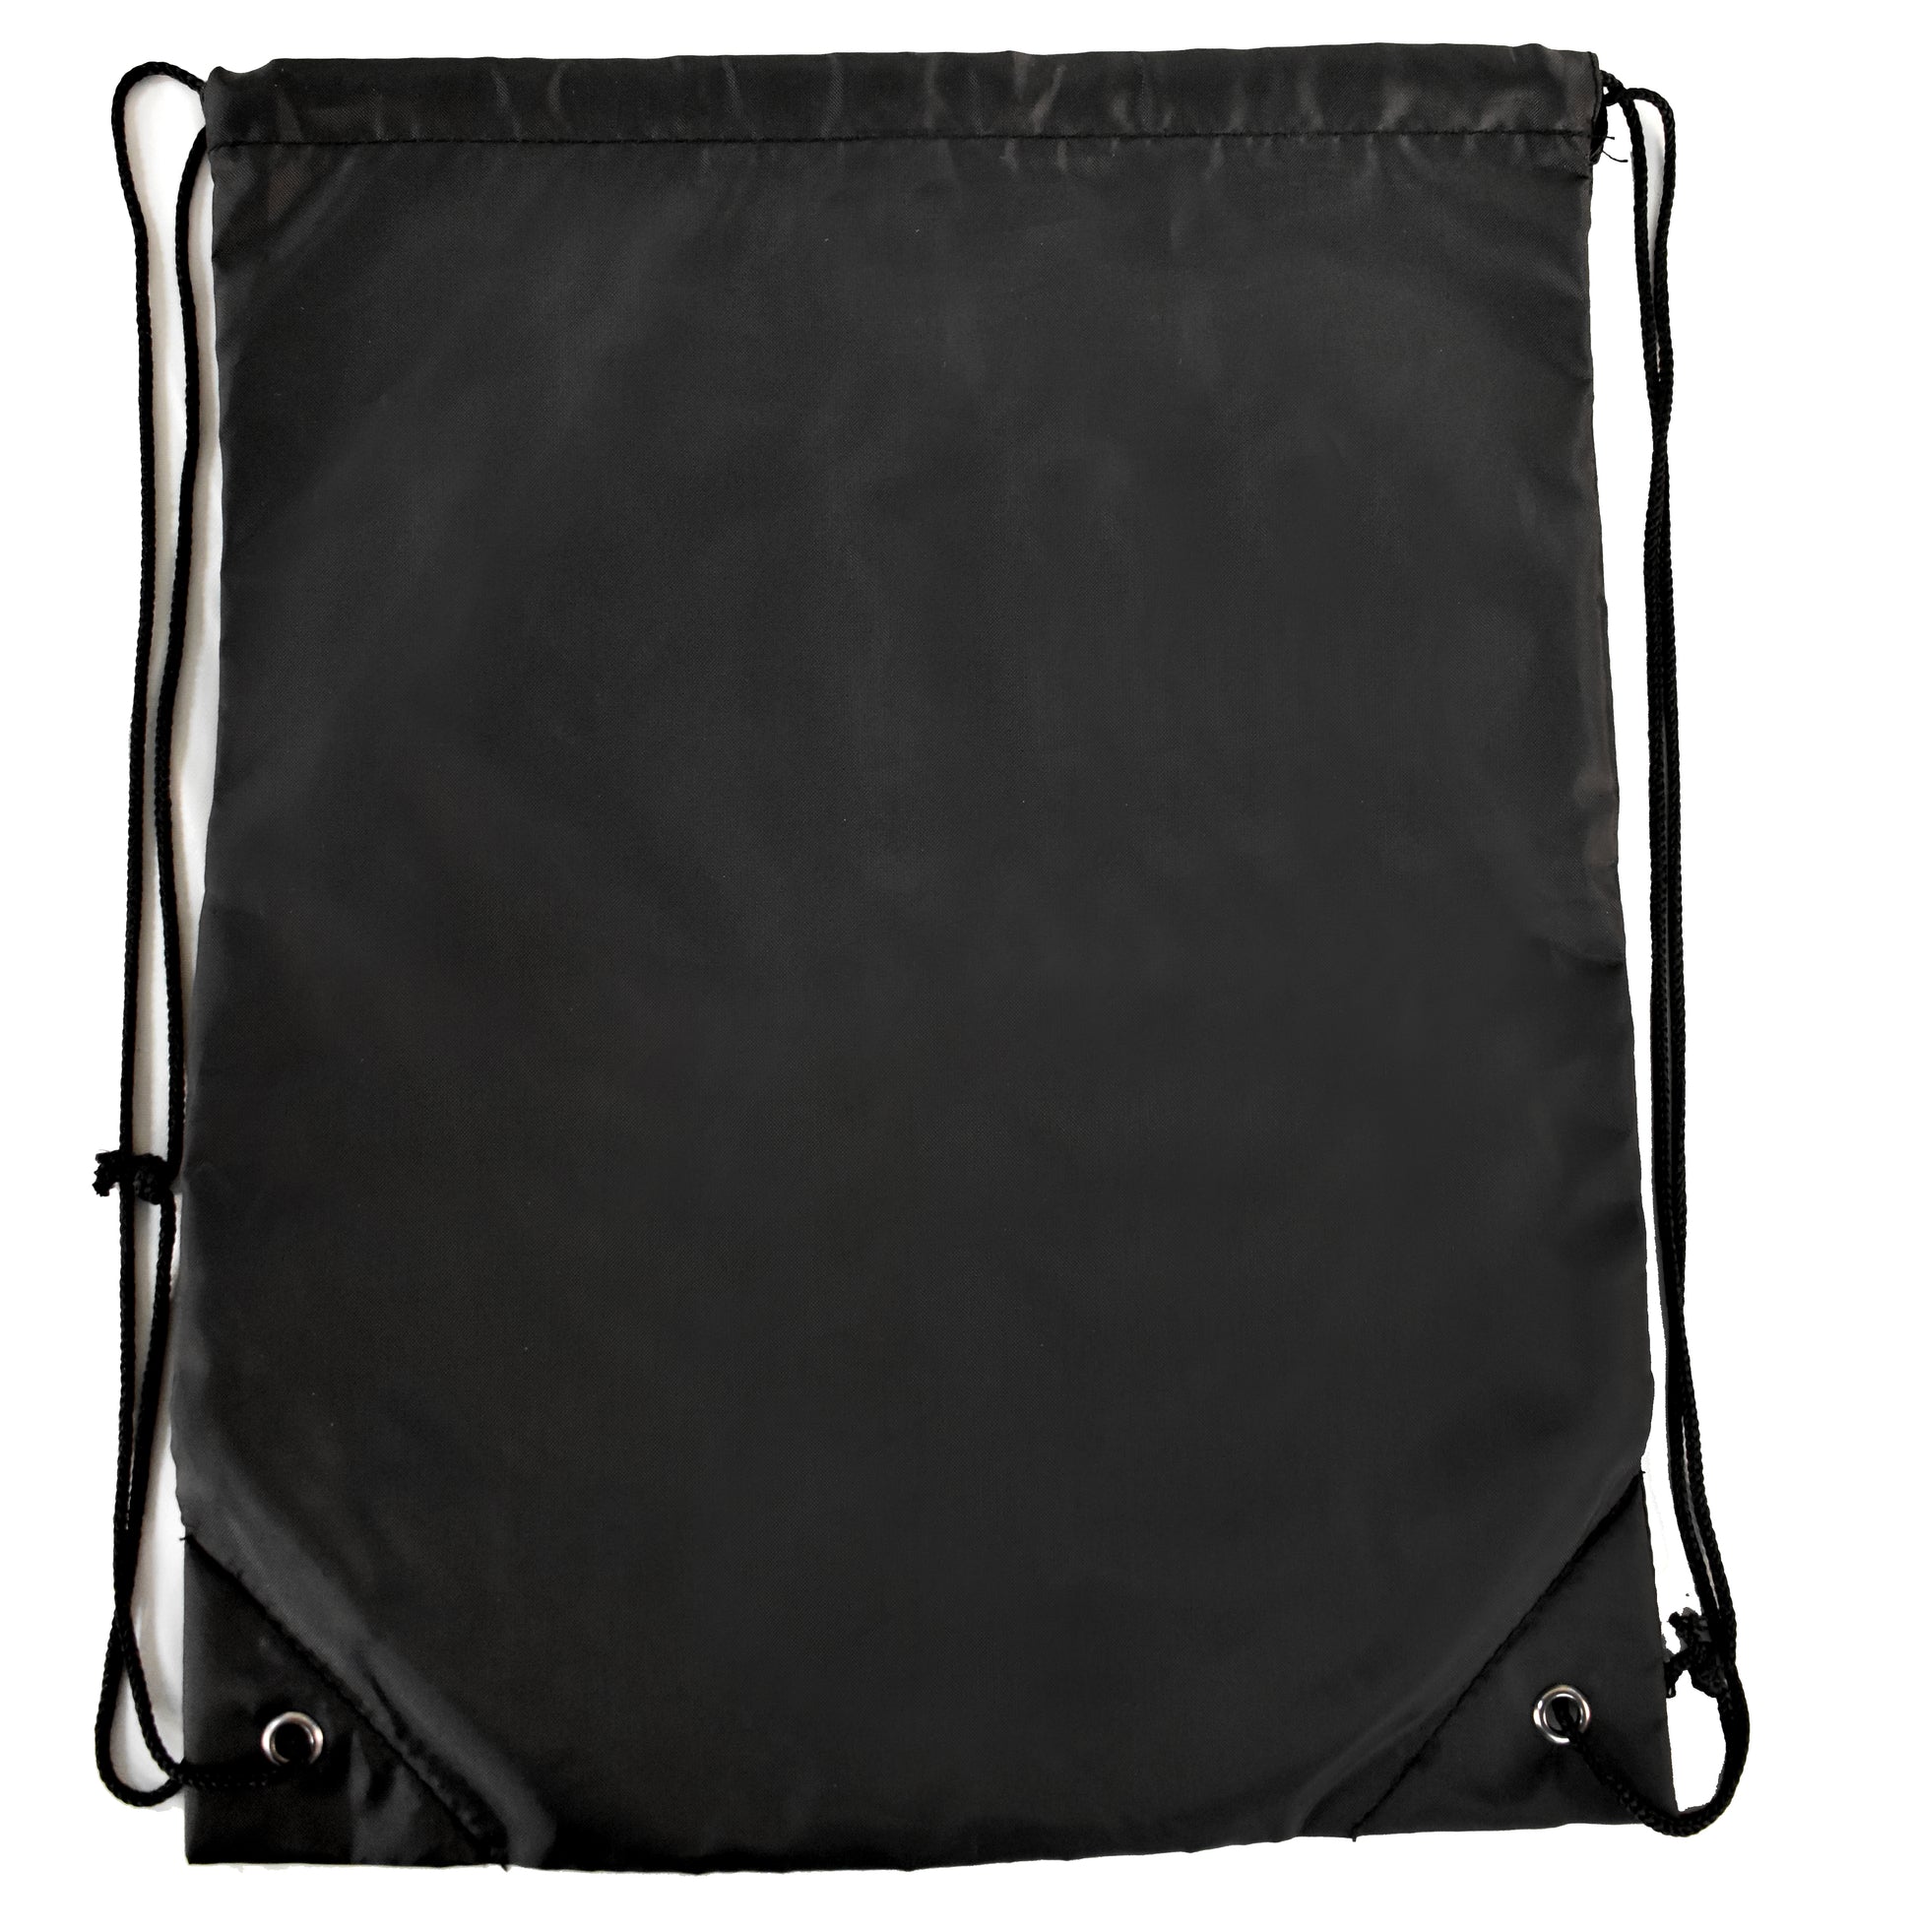 Utilitarian Cinch Pack | Budget Cinch Pack | Justtotebags.online